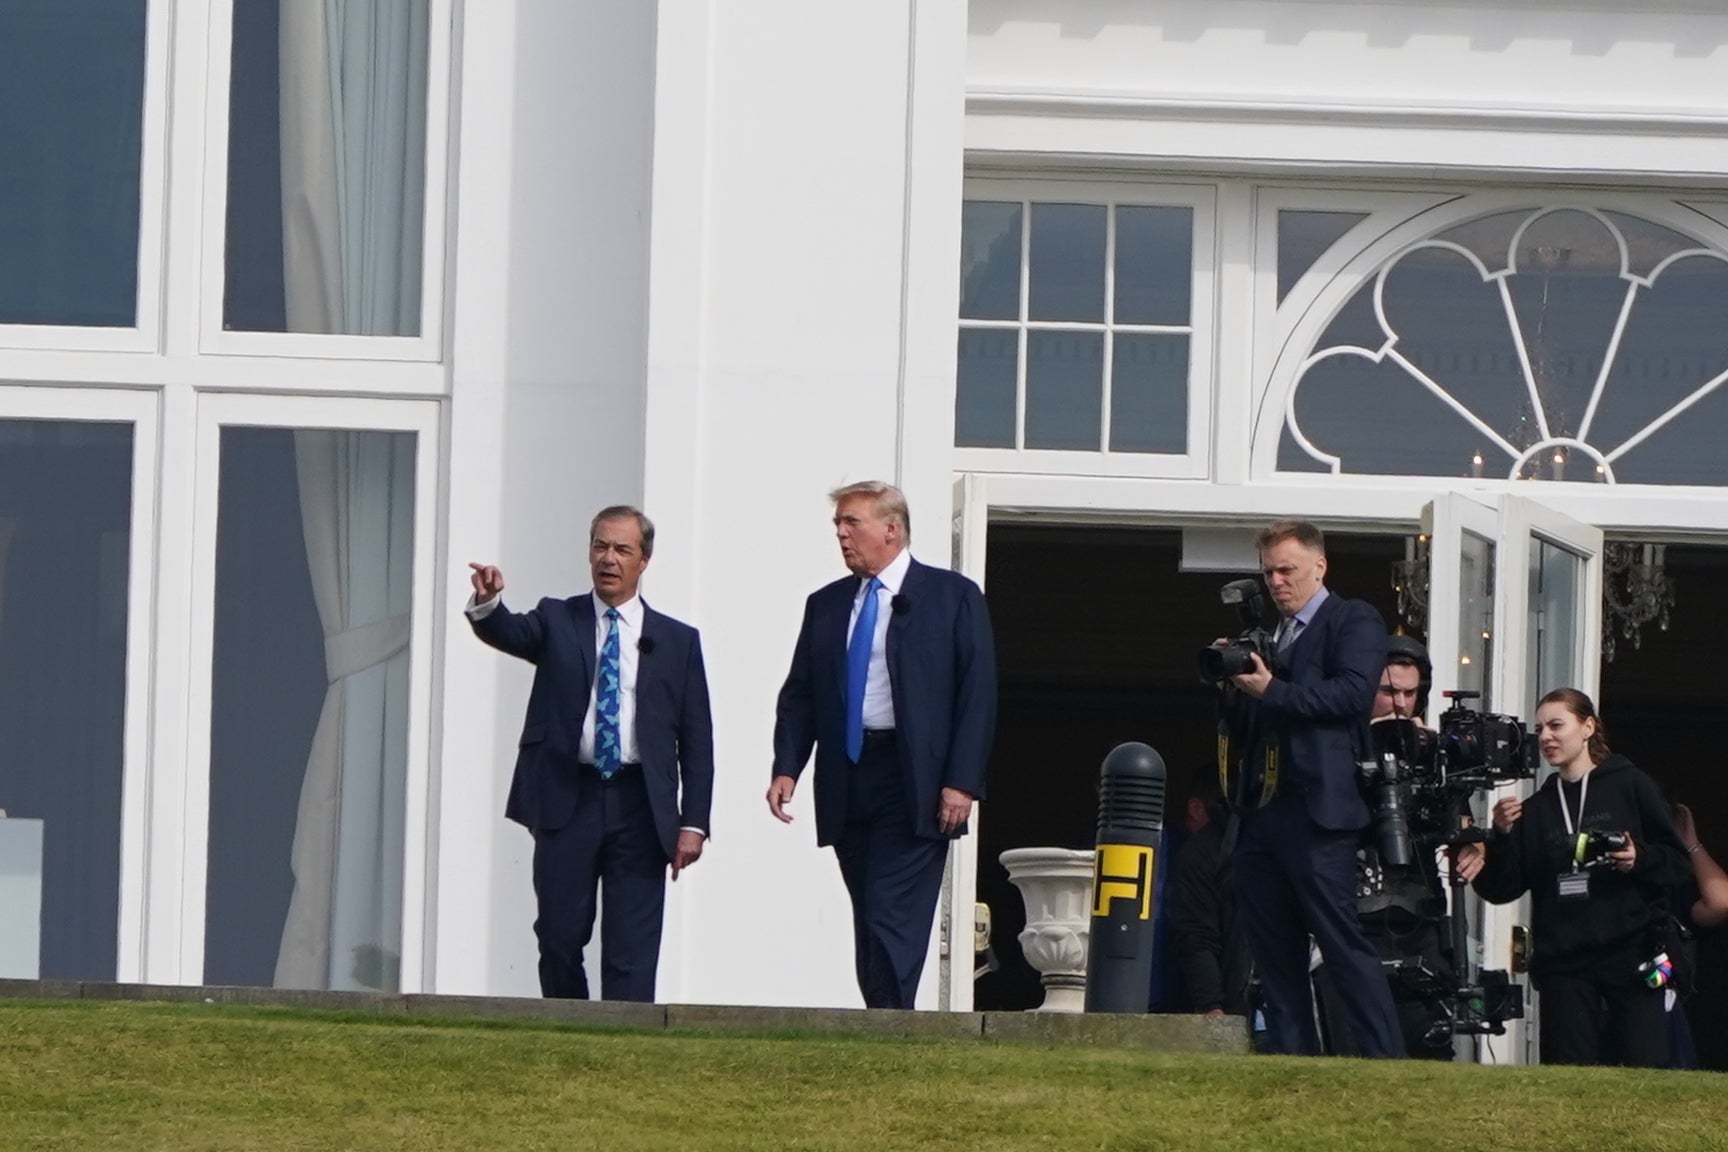 Donald Trump was interviewed by Nigel Farage at the former president’s Turnberry golf course in Scotland